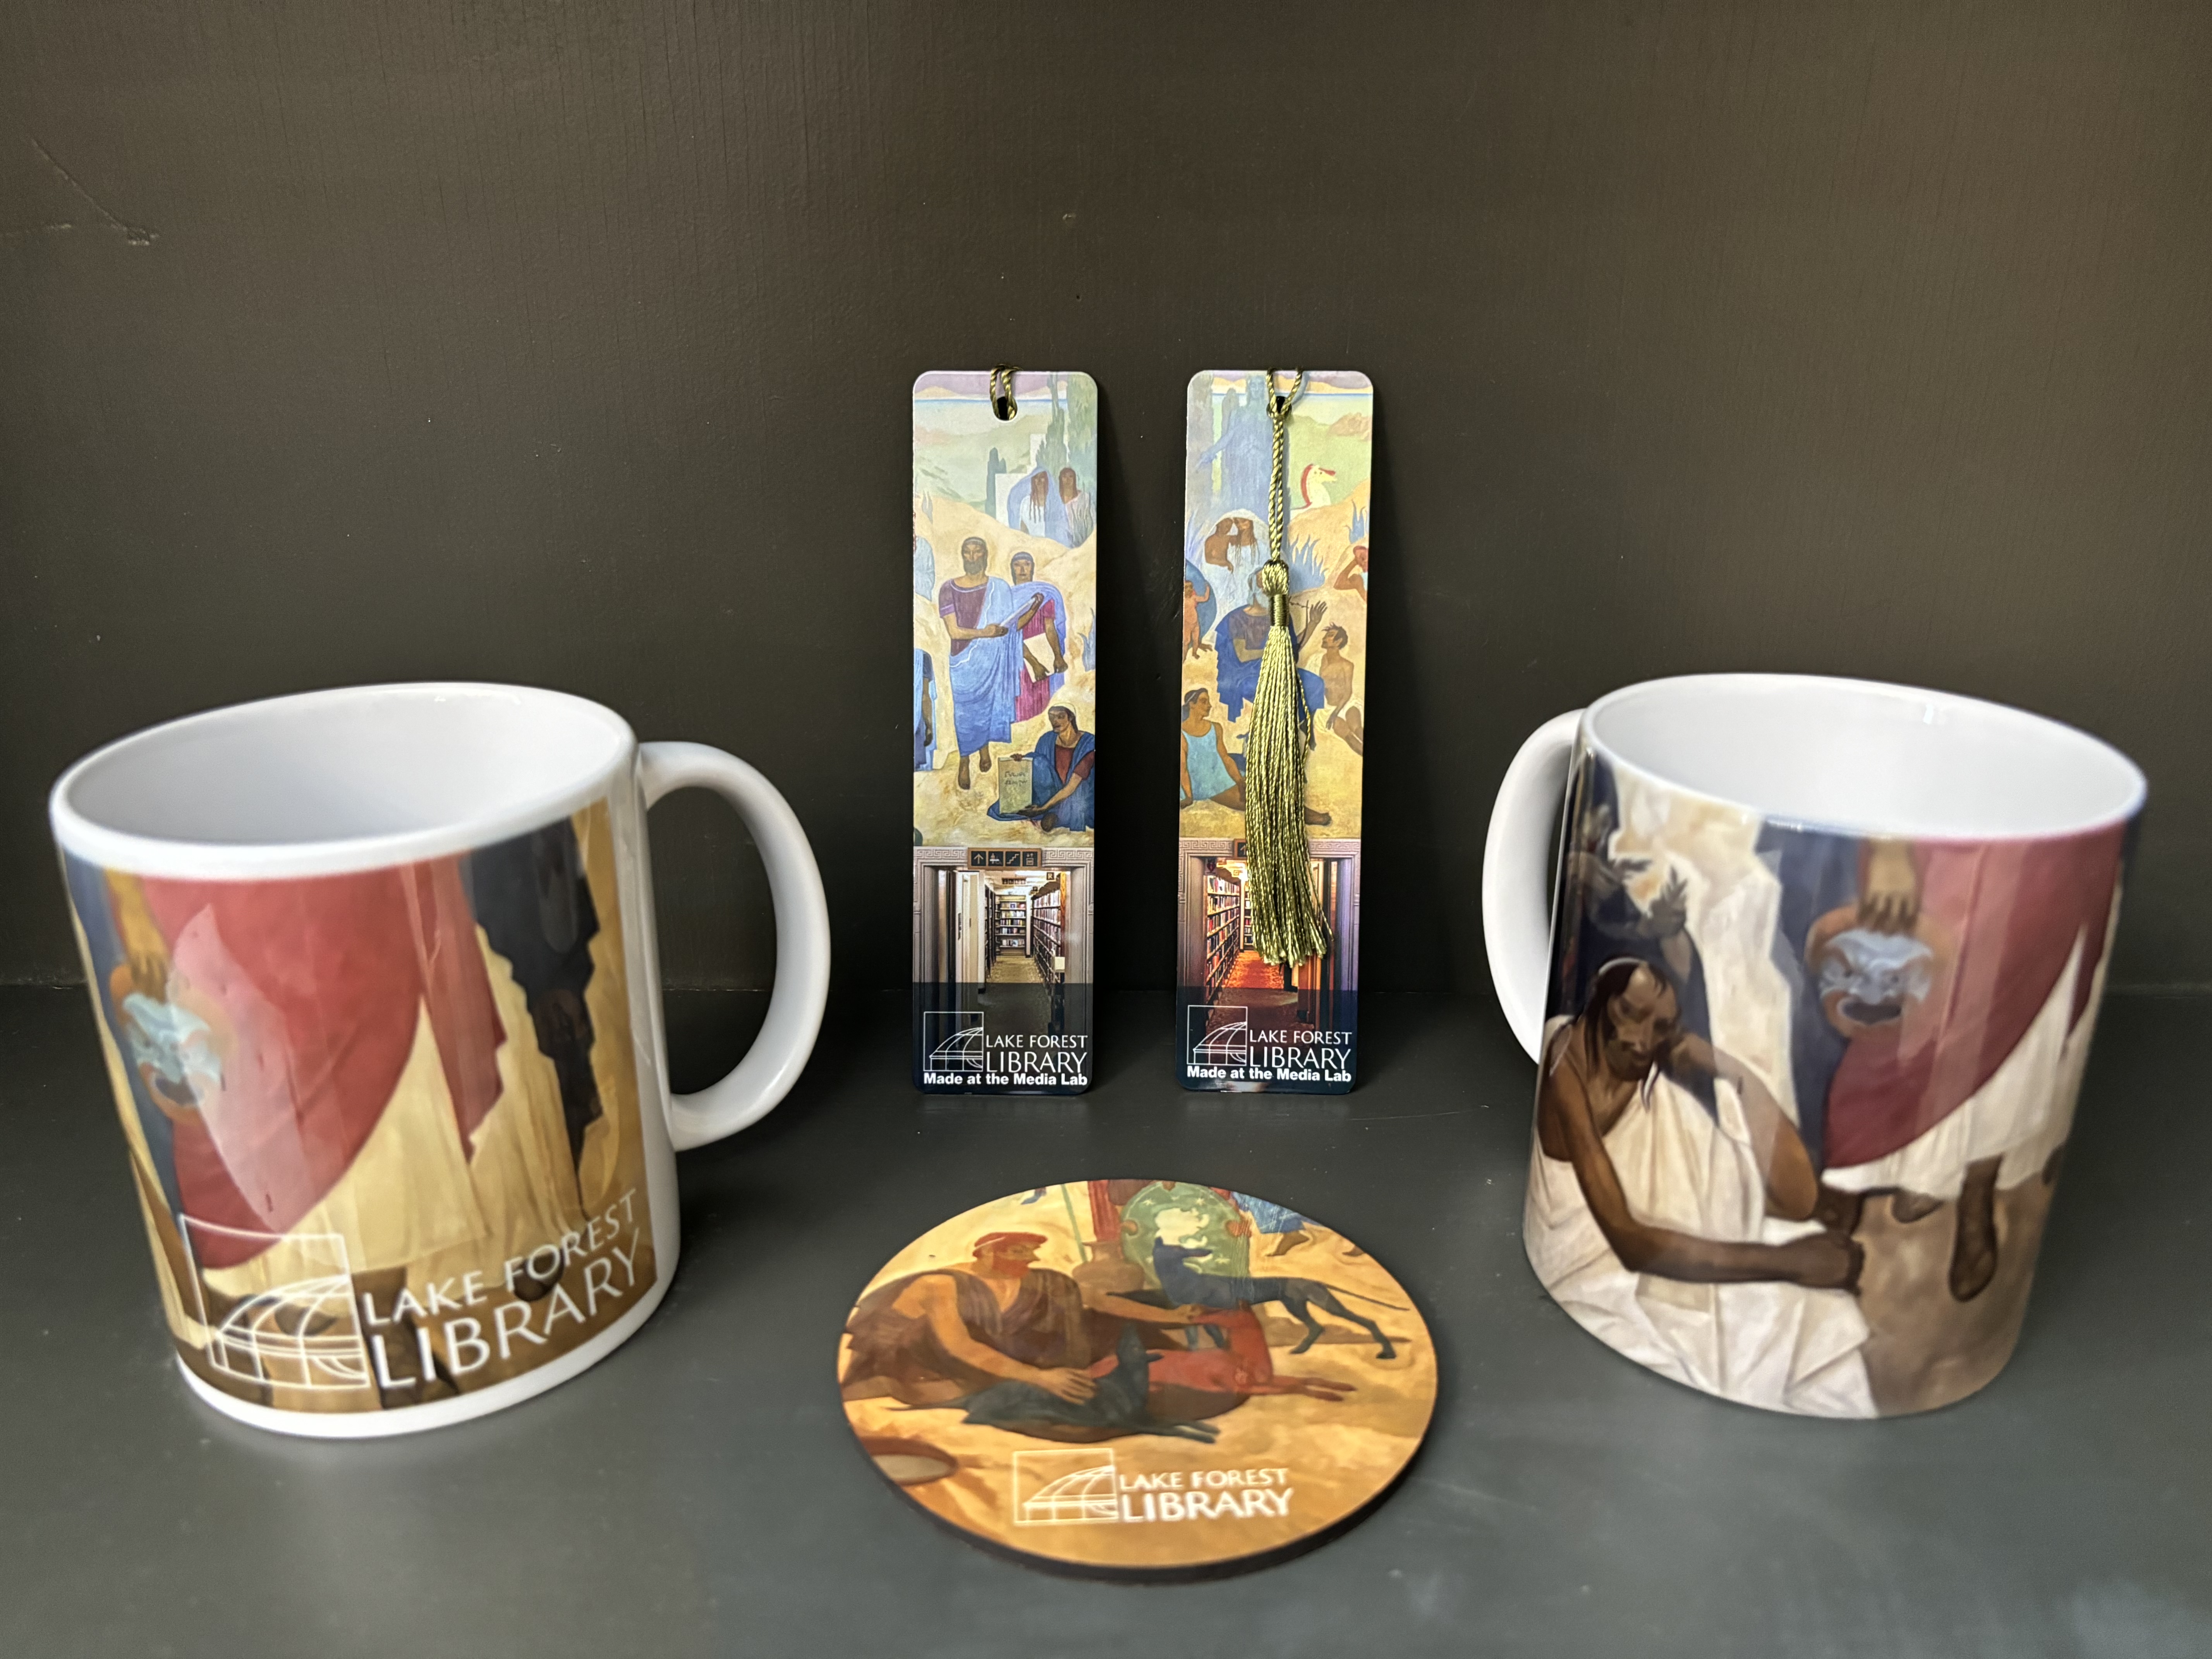 mugs, bookmarks, coaster created by usiing a sublimation printer